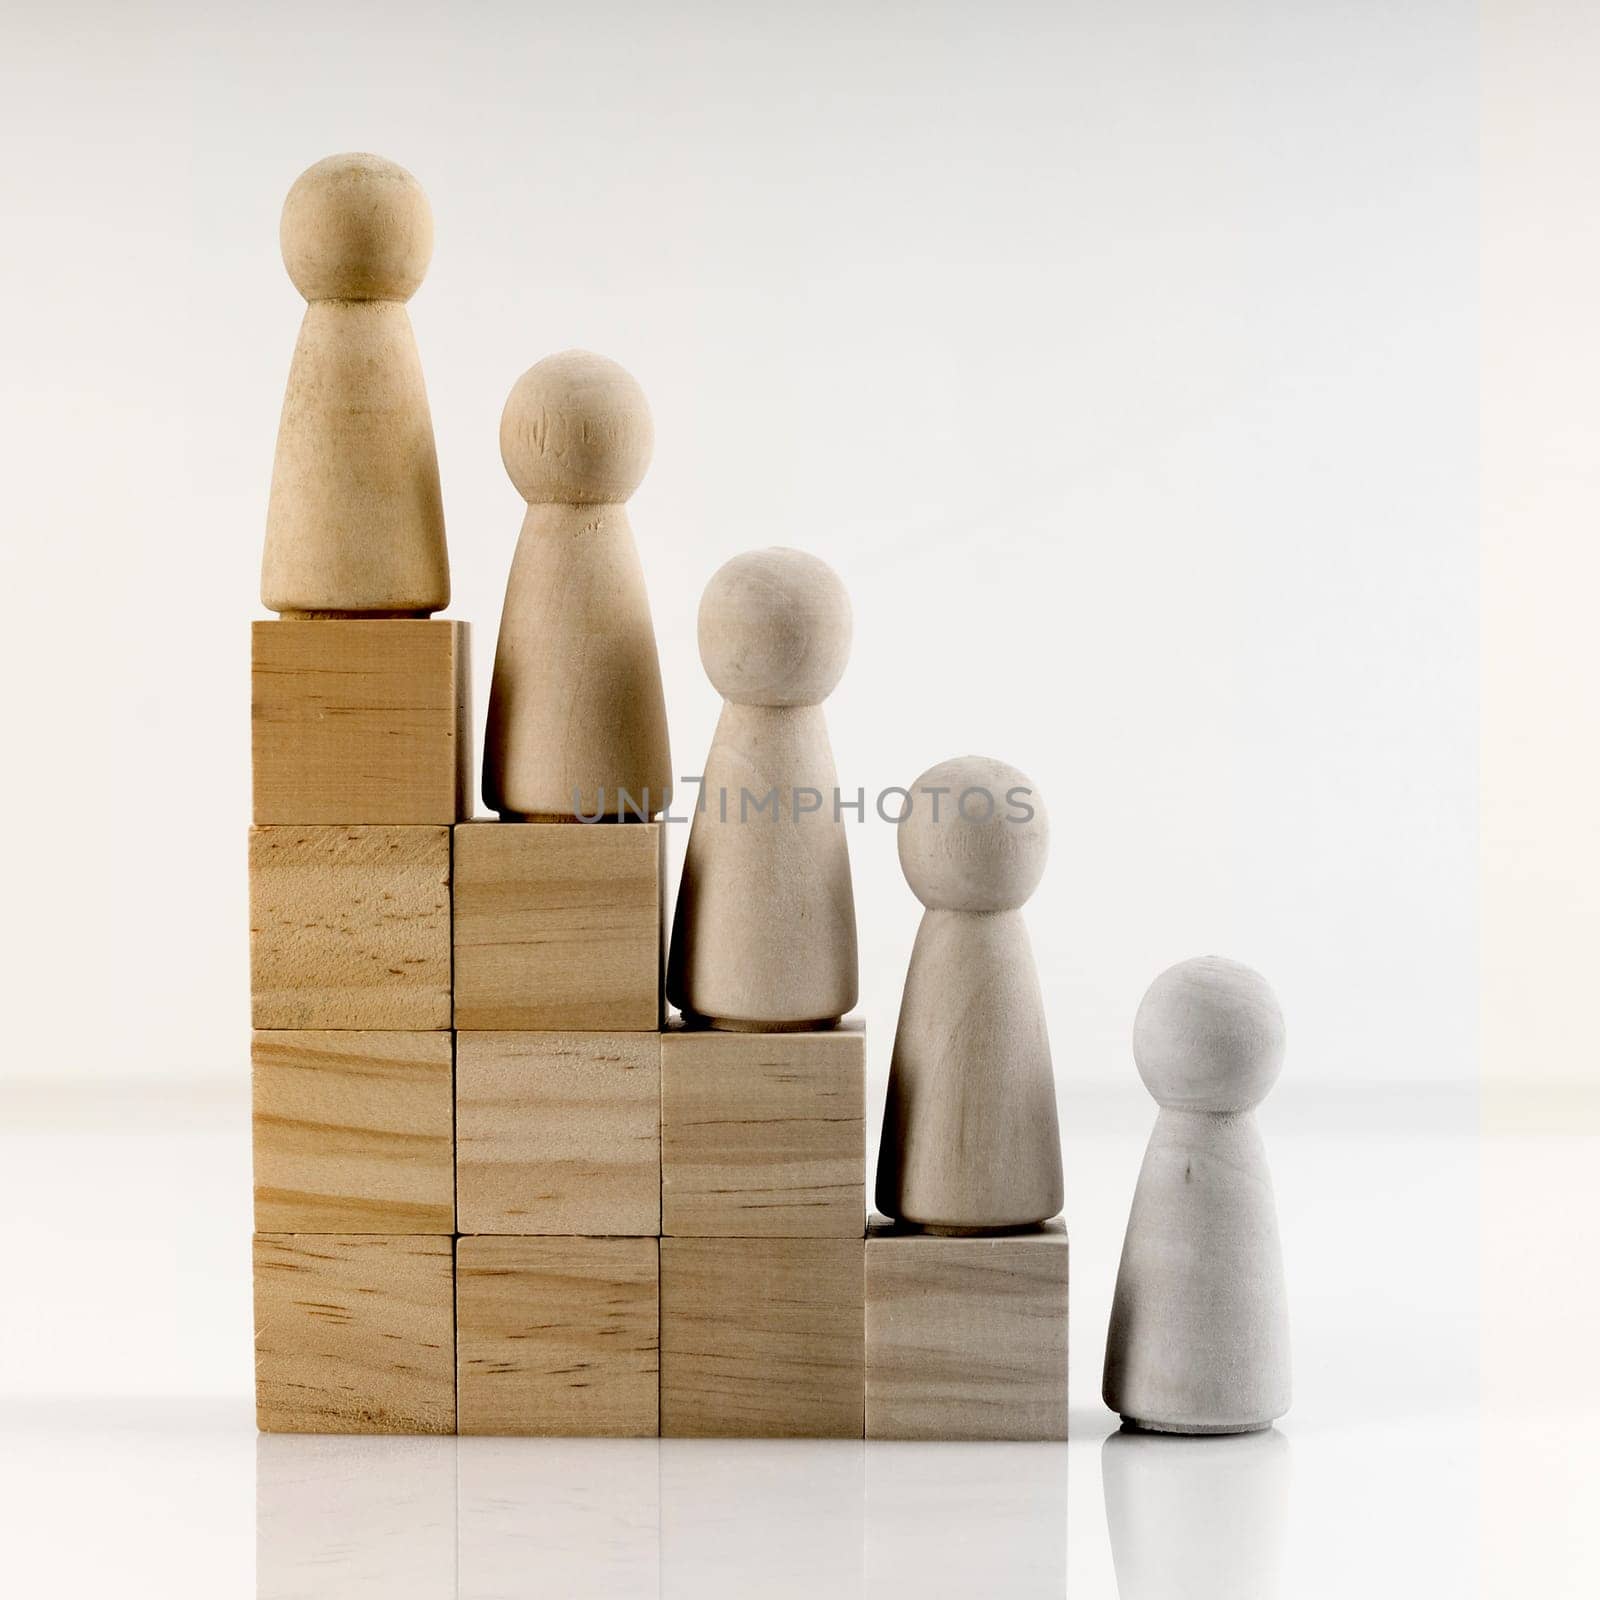 Wooden figures stand on the cubes that represent the stairs. by zartarn